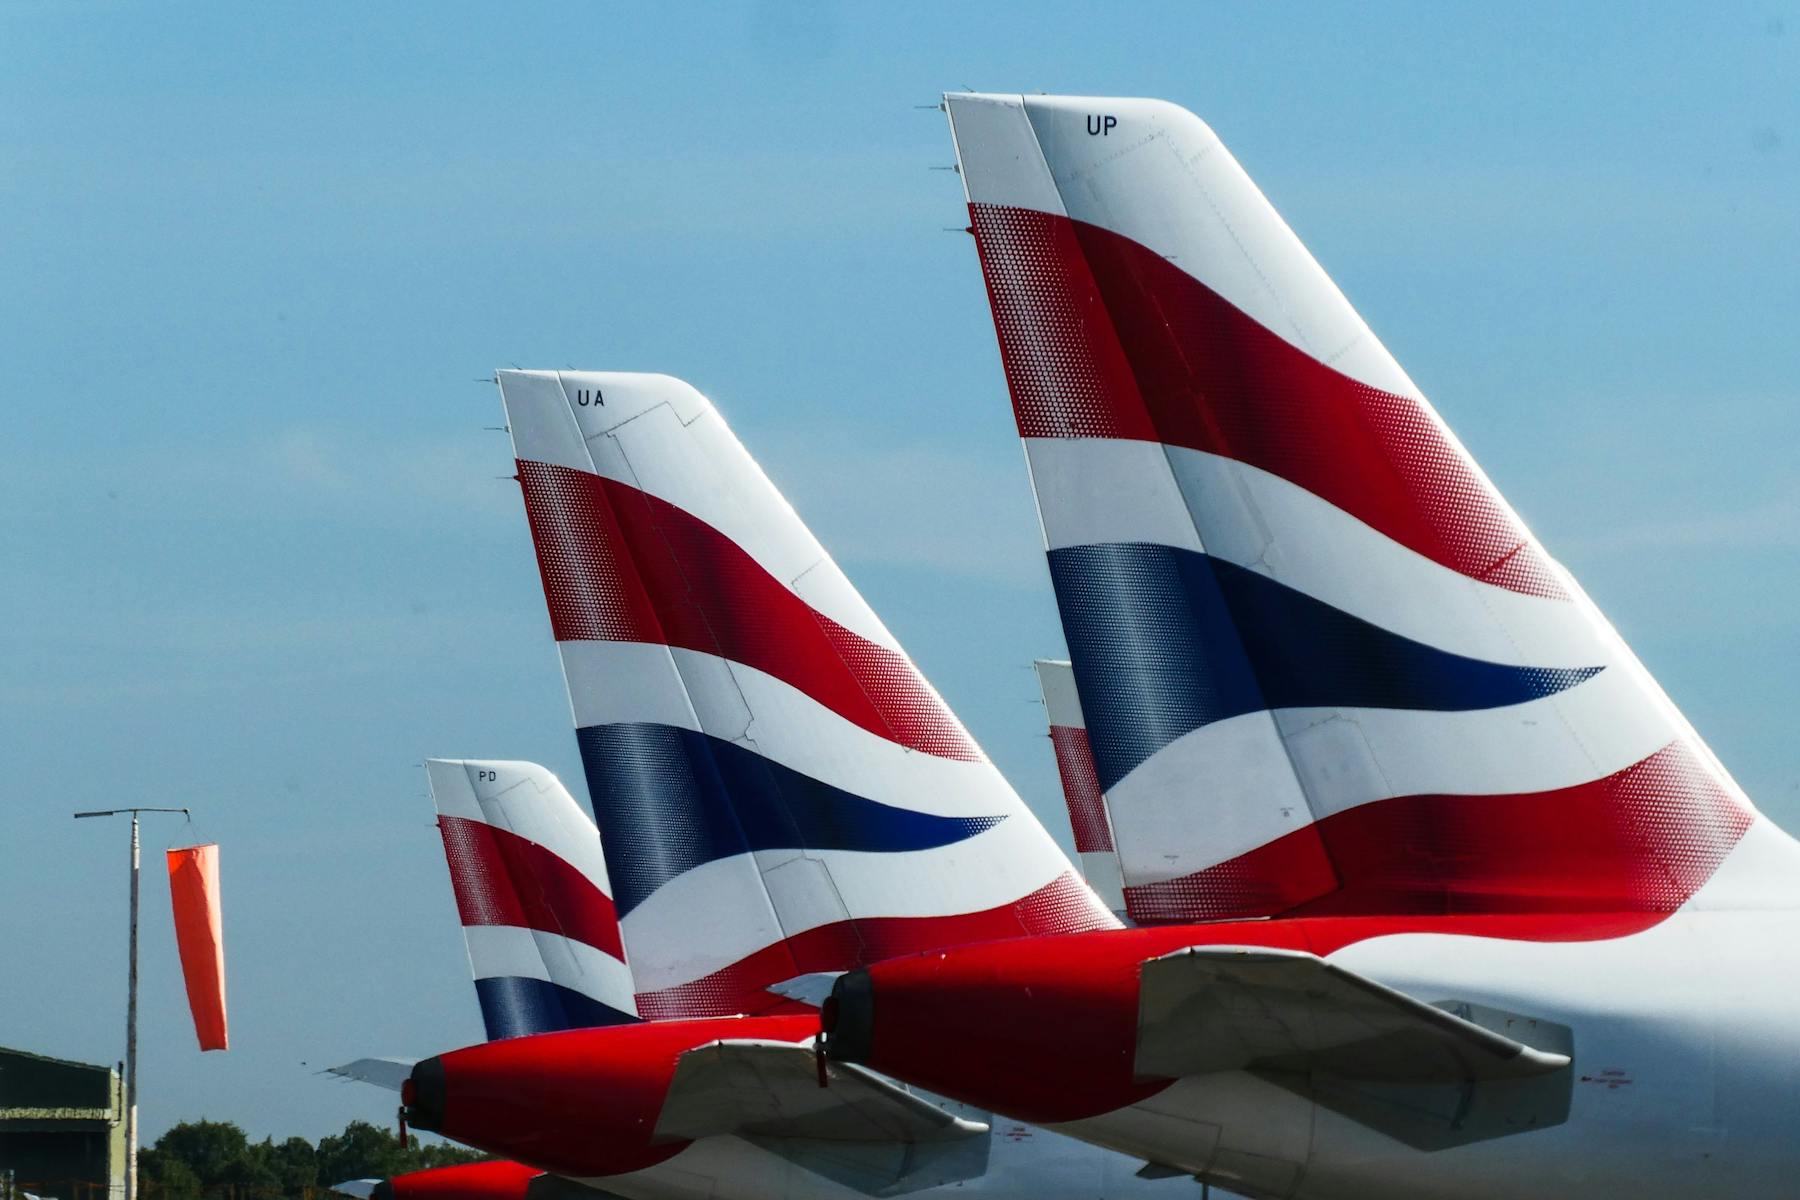 Tails of three British Airways aircraft parked at Bournemouth Airport.